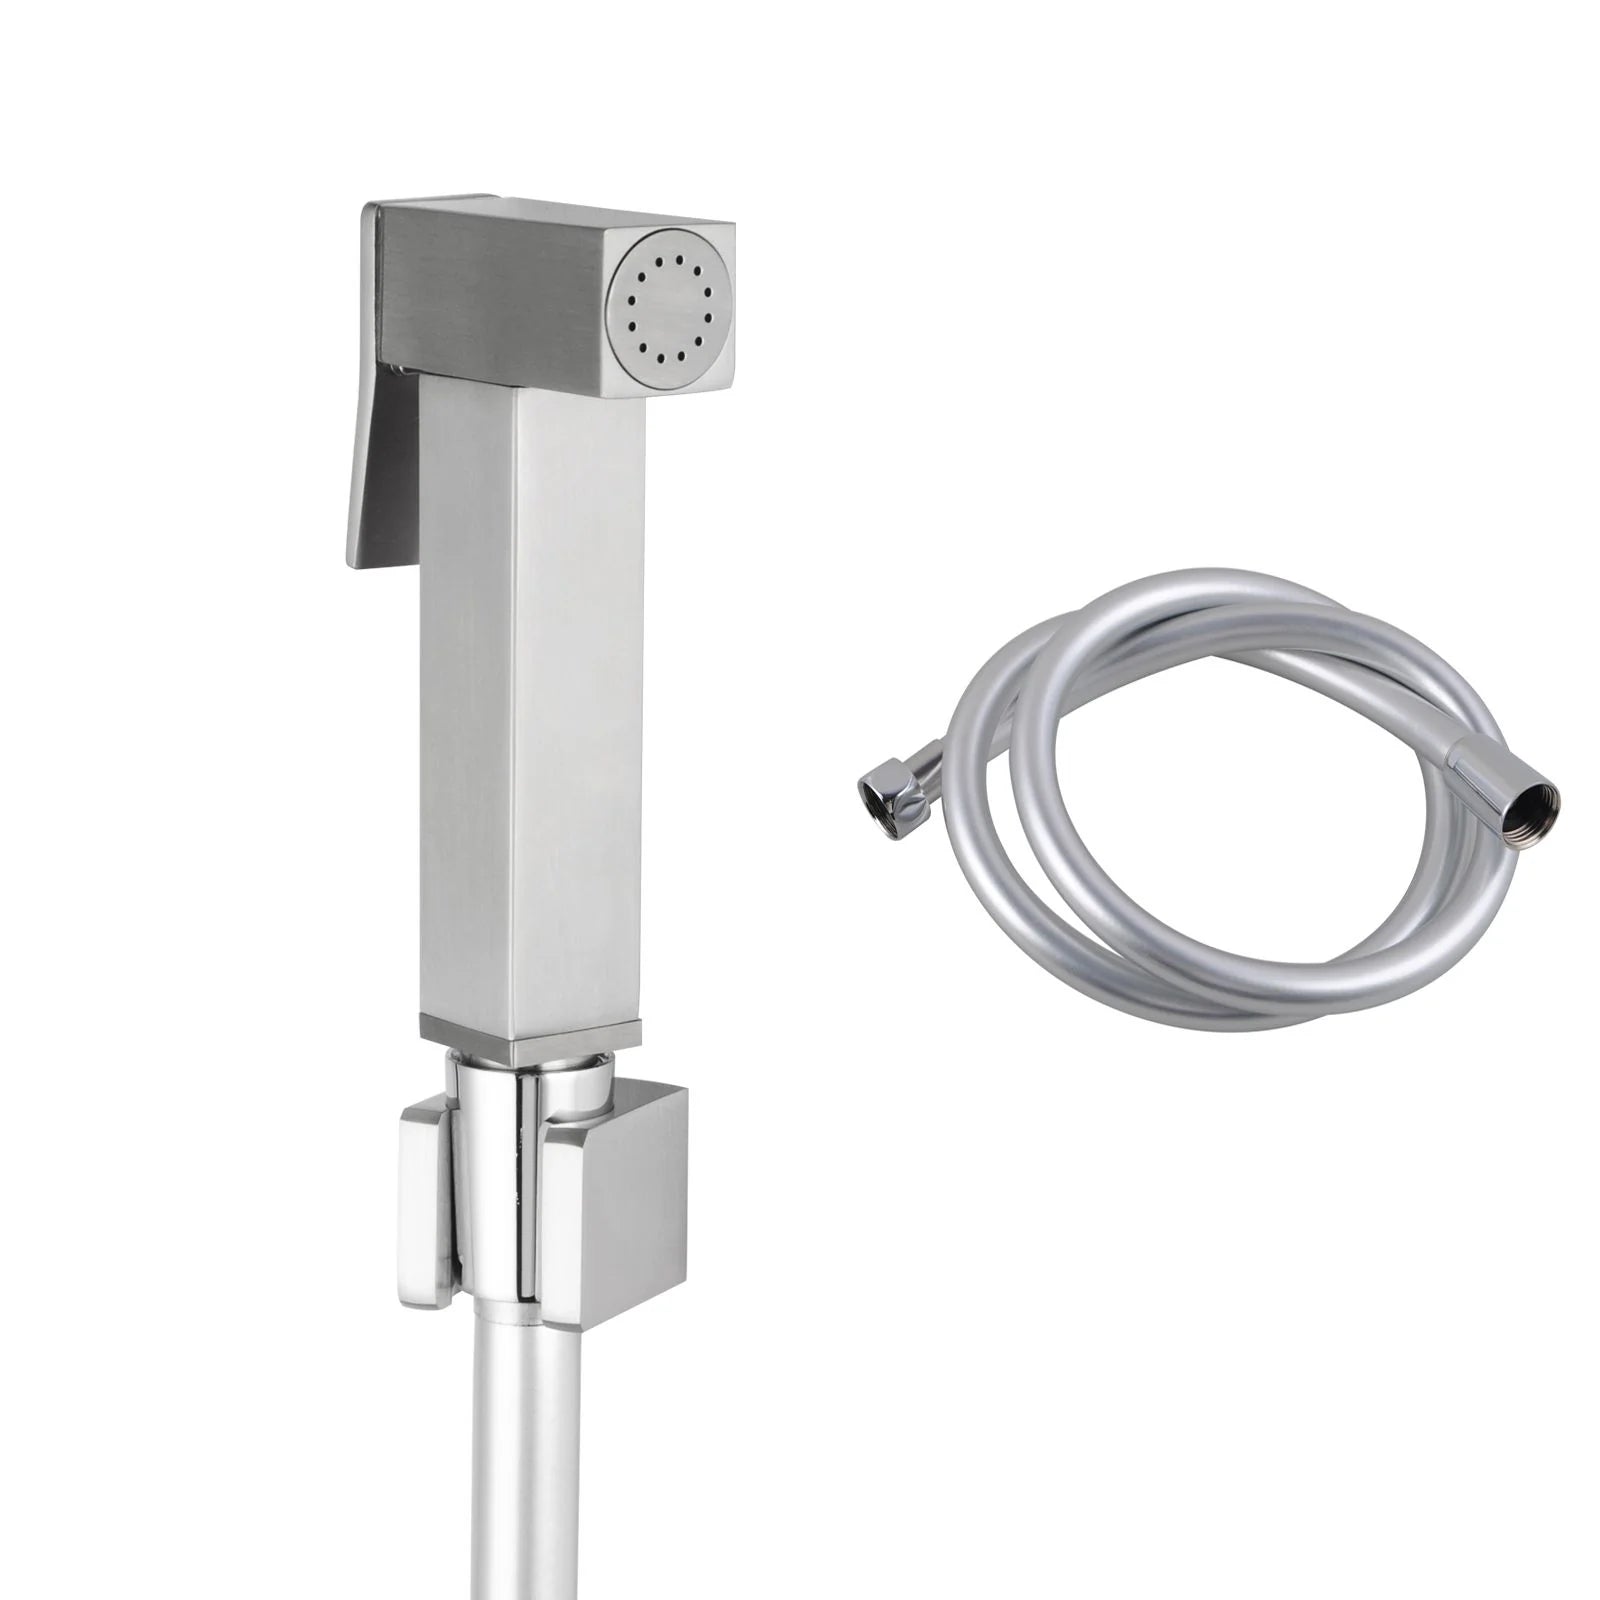 Square Brass Bidet Spray Kit with 1.2m PVC Hose: Compact and Durable-BU0009E.SH-Brushed Nickel